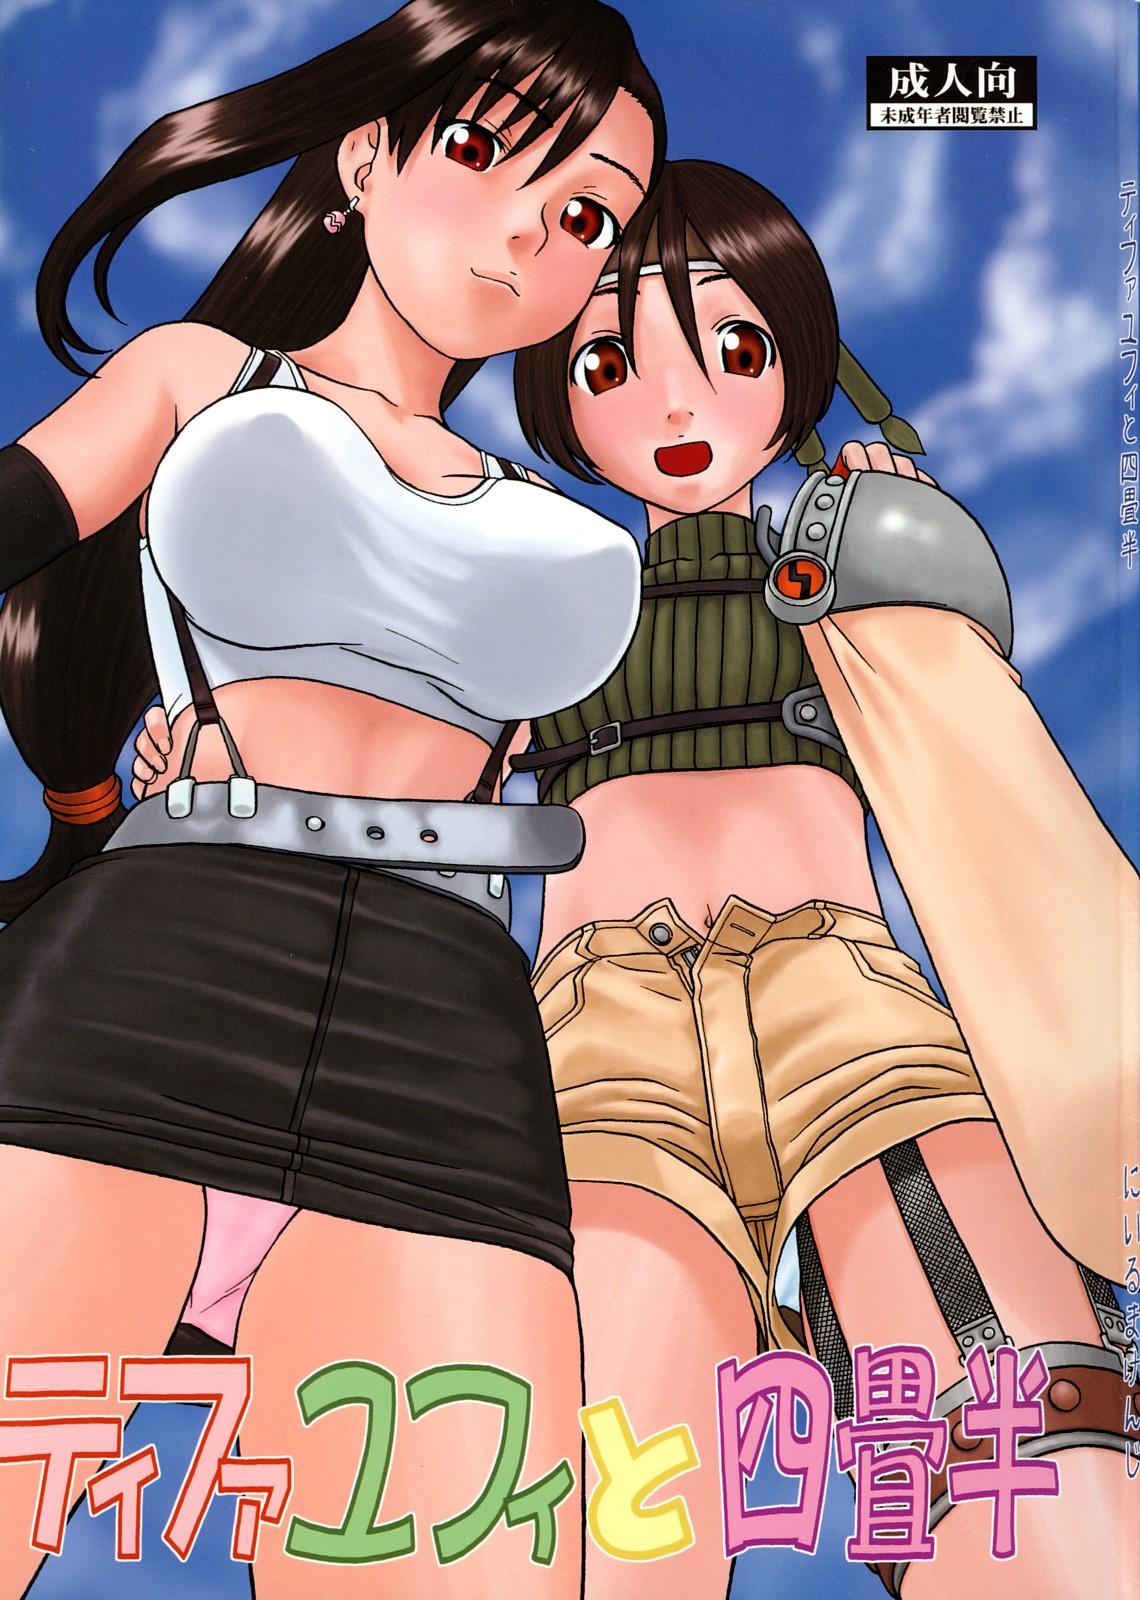 Massage Creep Tifa to Yuffie to Yojouhan - Final fantasy vii This - Page 1